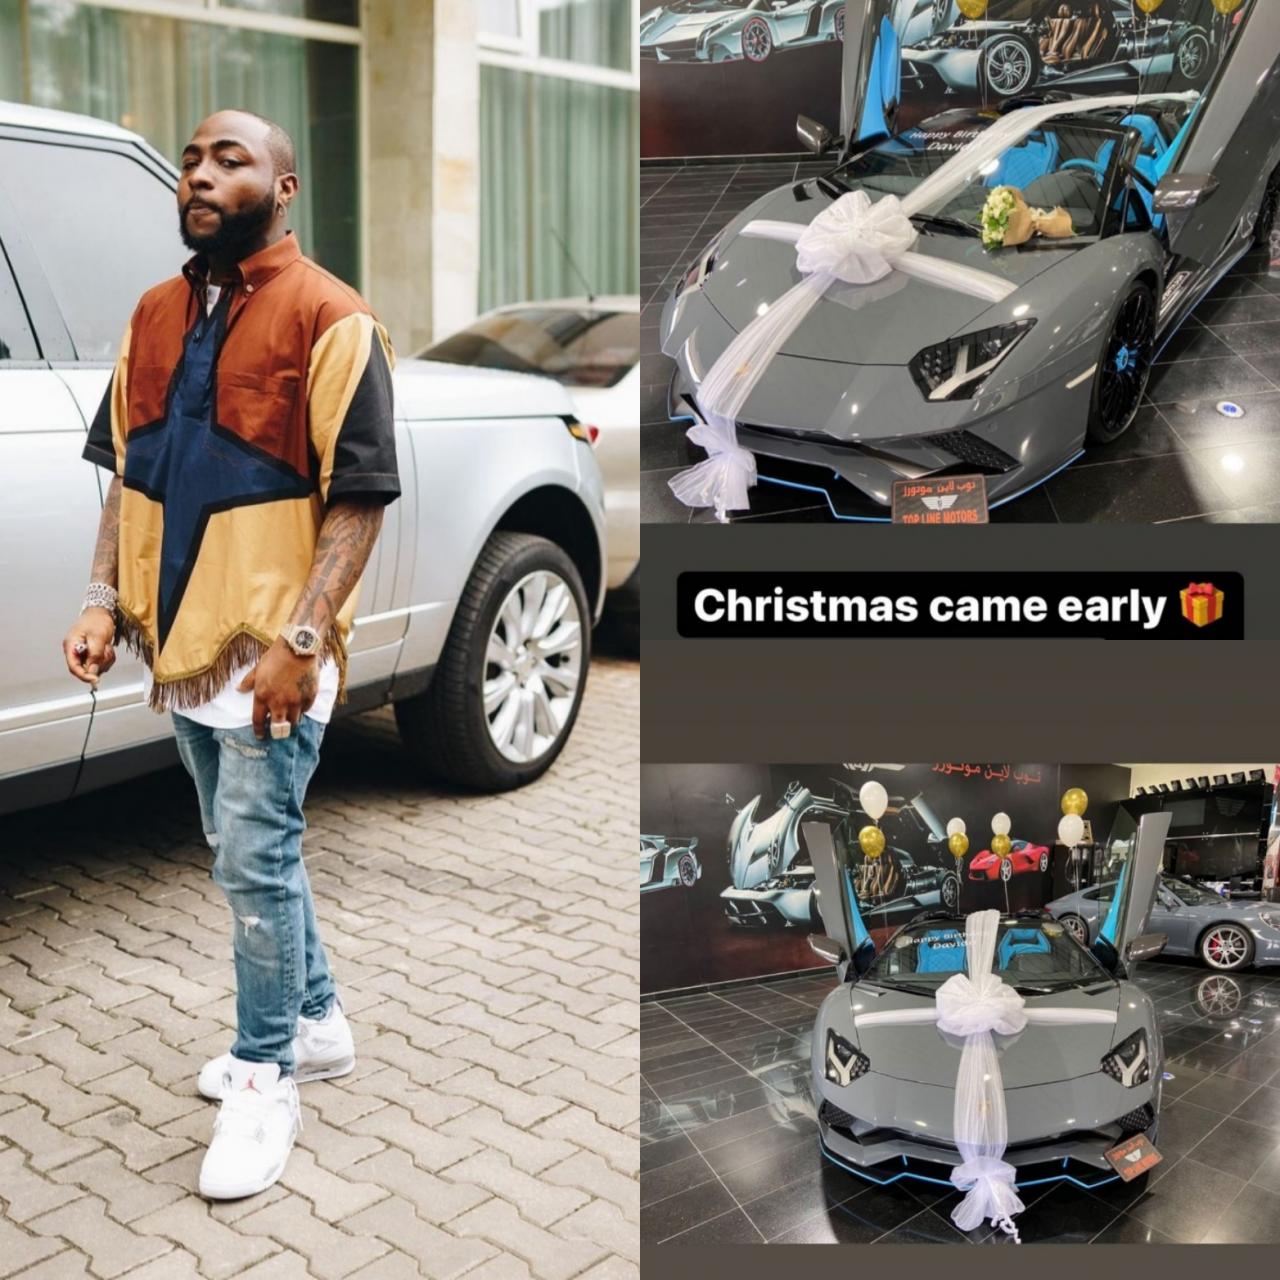 Davido buys new Lamborghini as a Christmas gift to himself weeks after buying a Rolls Royce for his birthday 